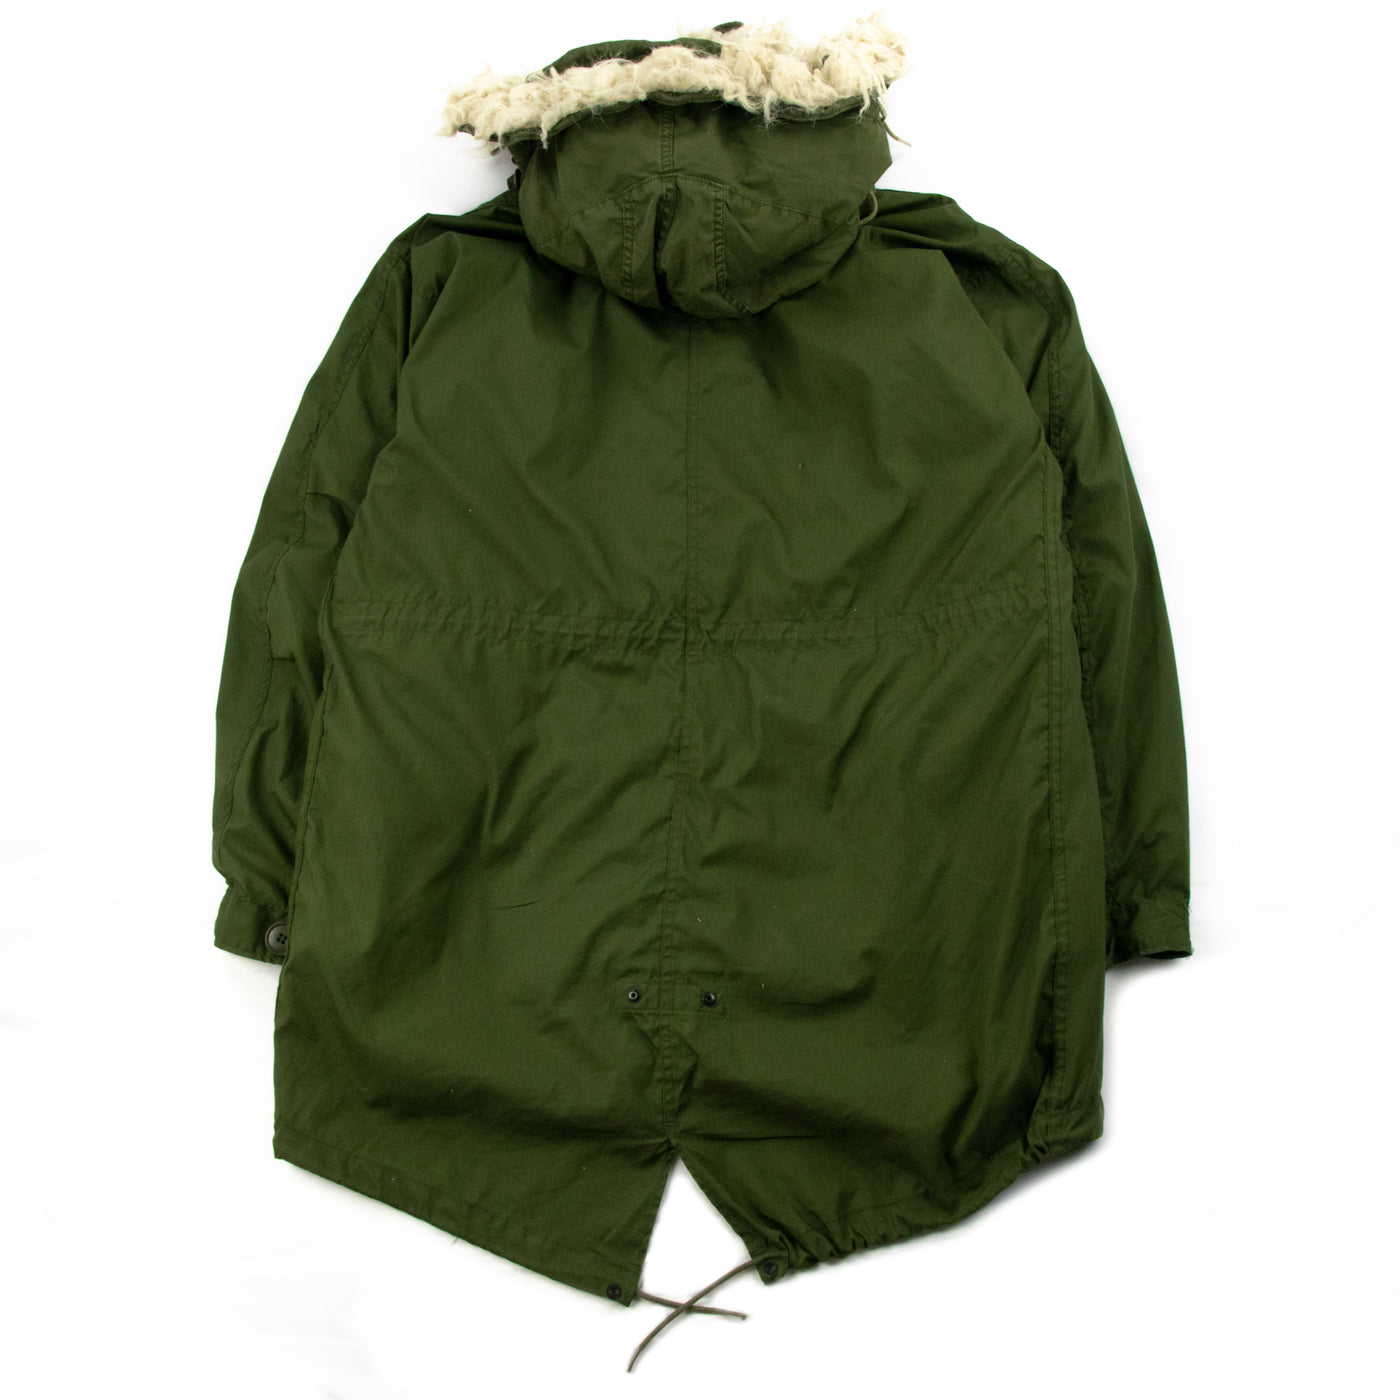 Vintage M-65 80s US Army Extreme Cold Weather Fishtail Parka - S Oversized Back